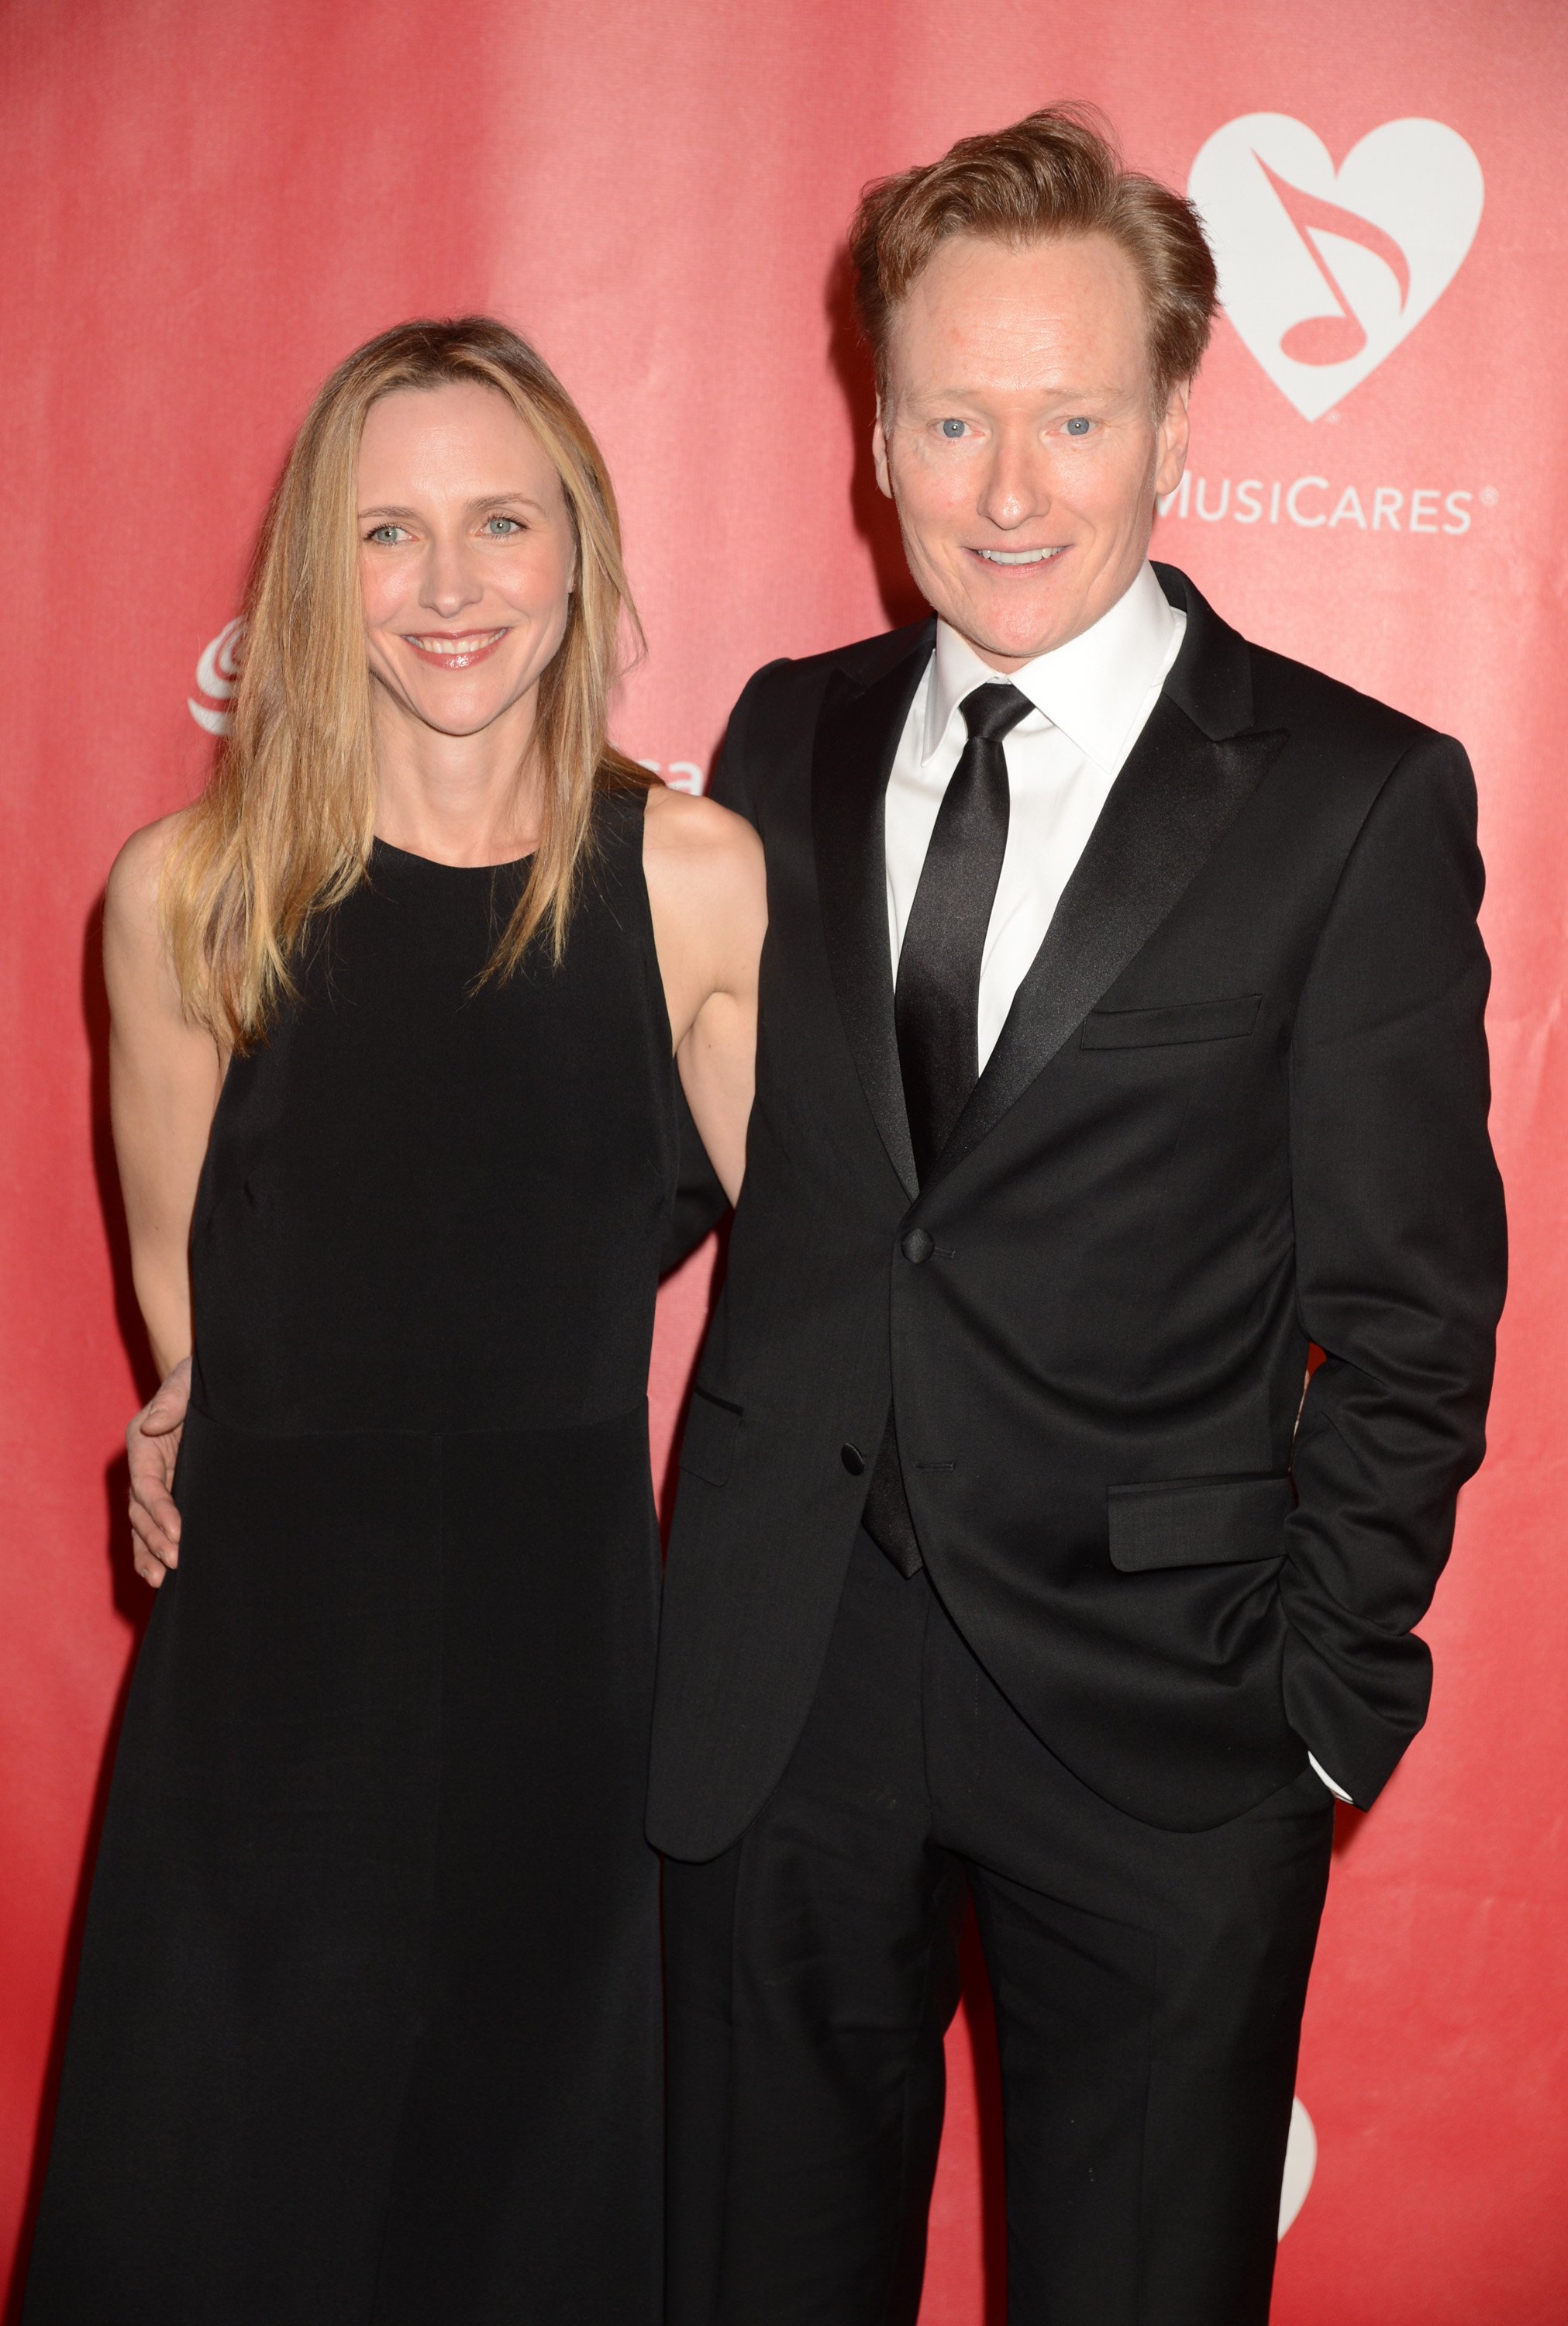 Liza Powel O'Brien and Conan O'Brien attend the 2013 MusiCares Person Of The Year Honoring Bruce Springsteen at Los Angeles Convention Center on February 8, 2013, in Los Angeles, California. | Source: Getty Images